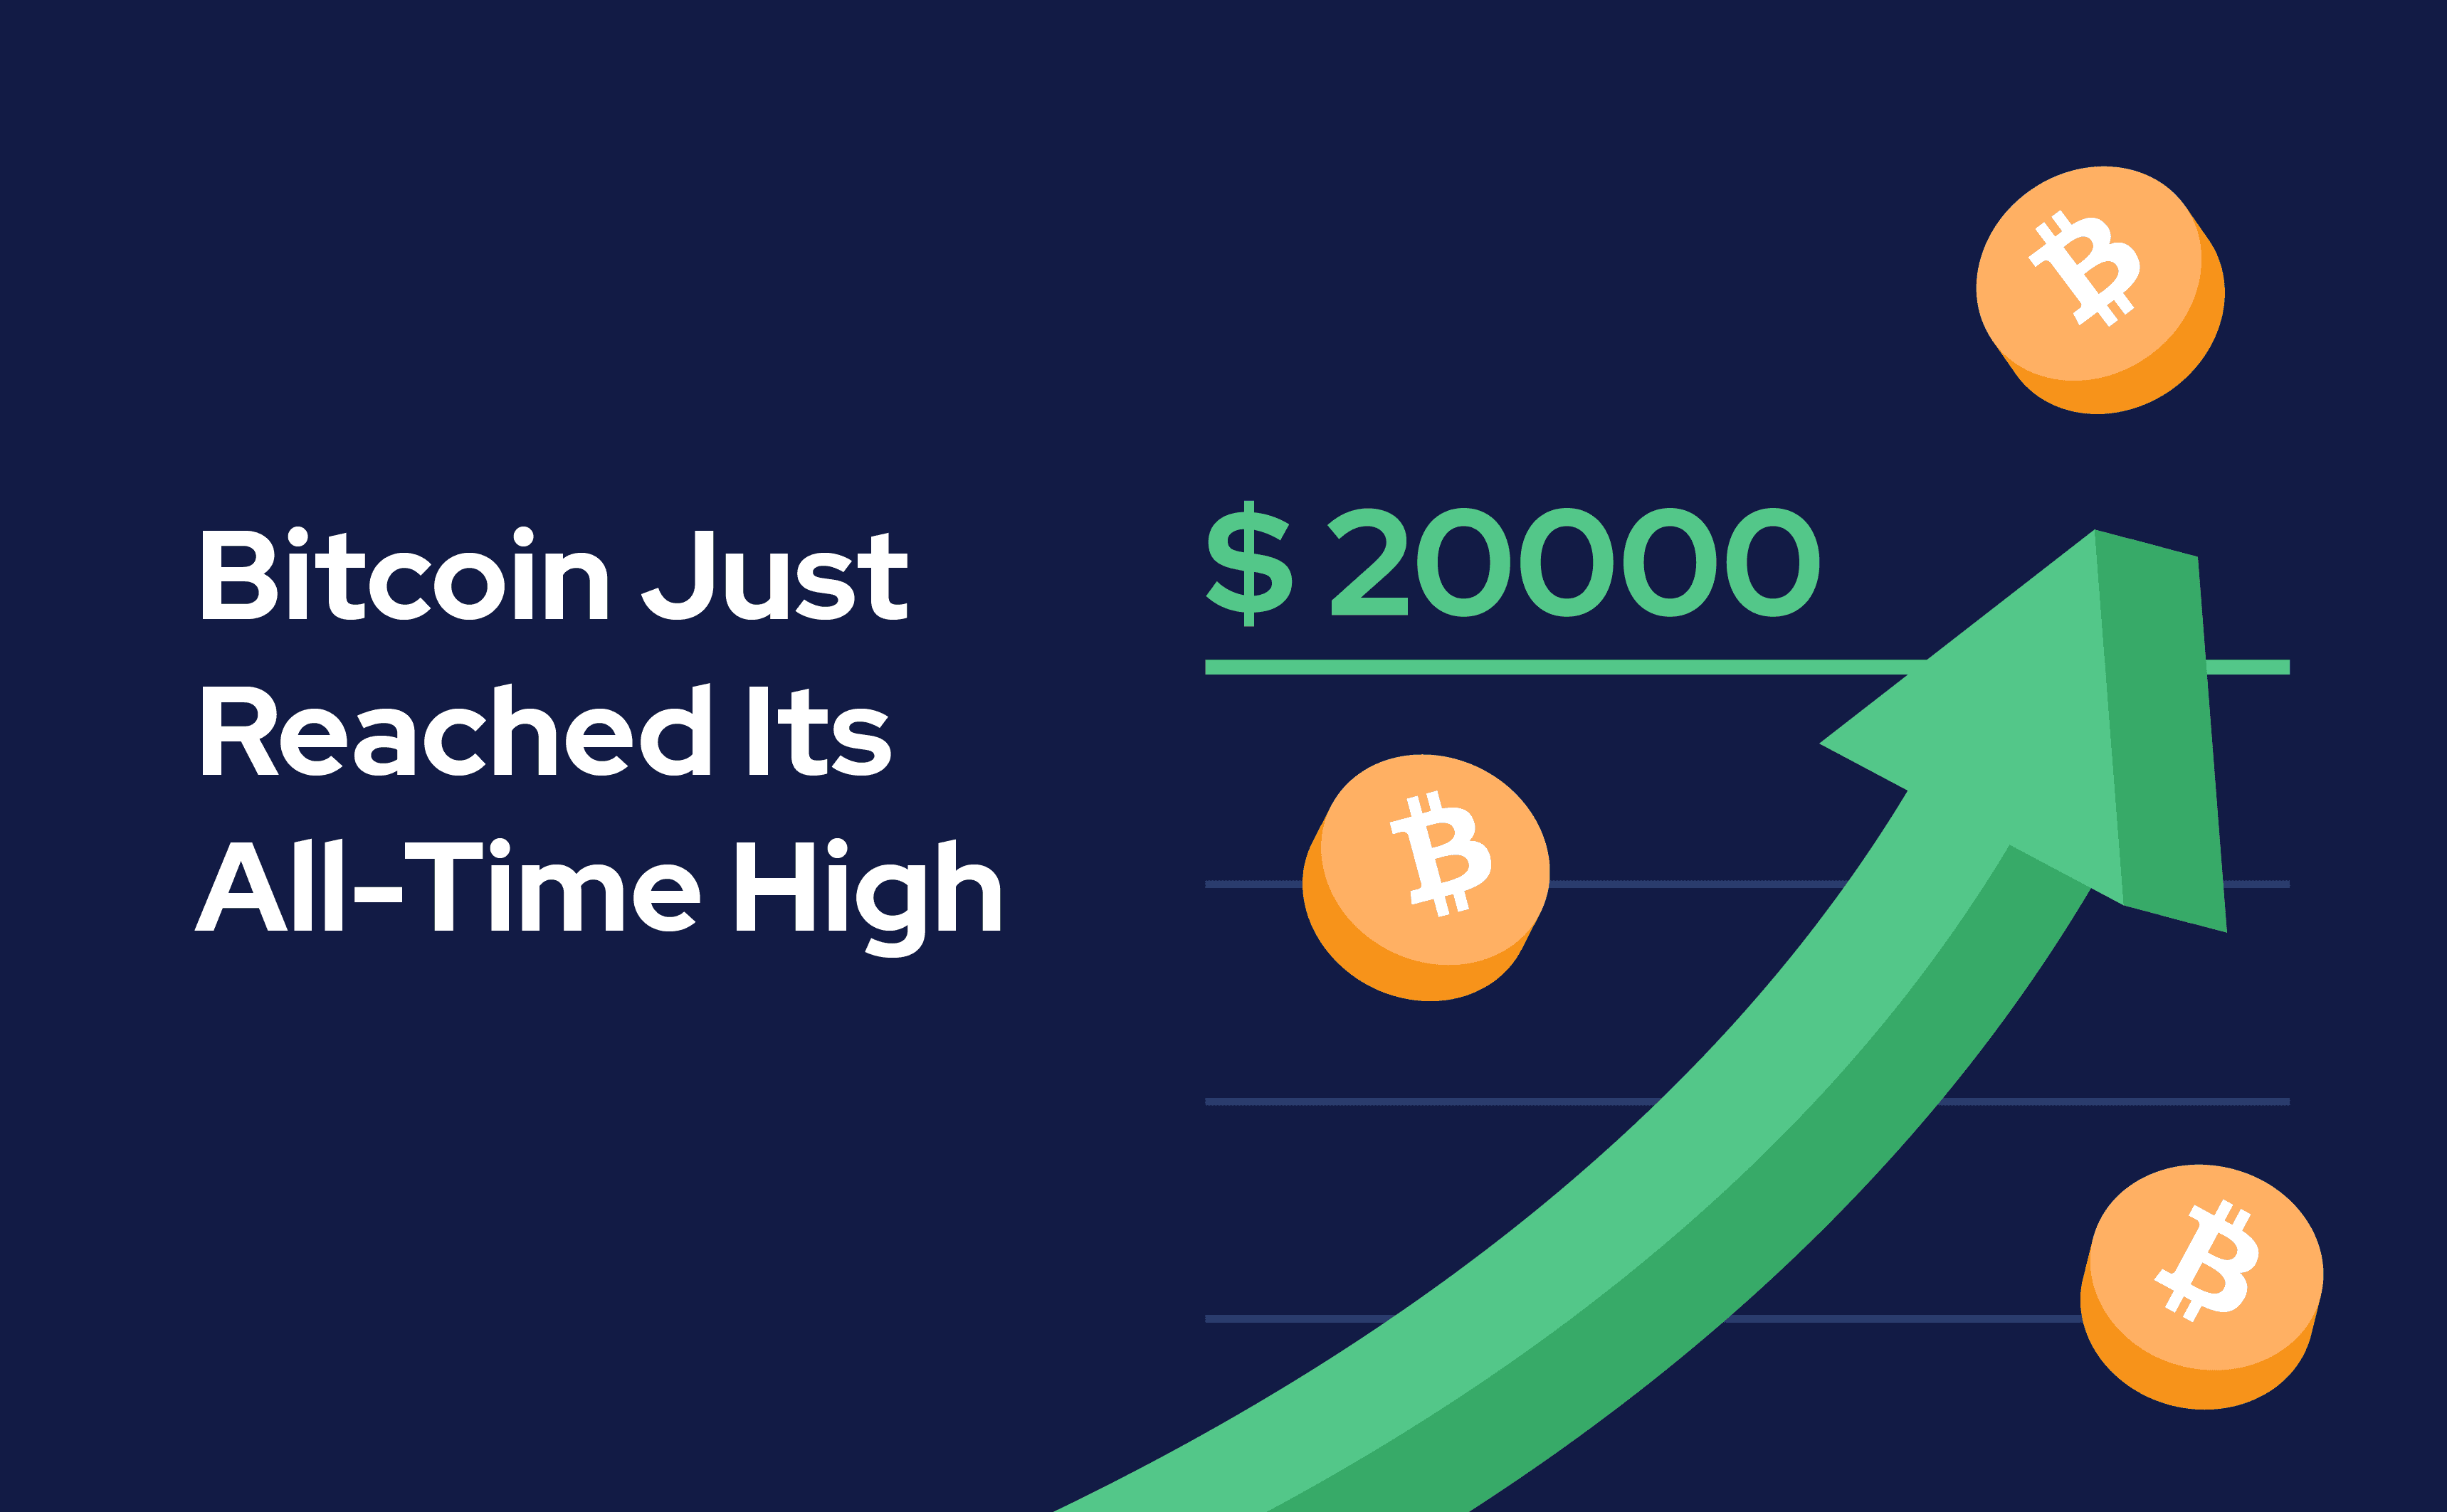 Bitcoin has reached the 20,000 USD mark, its highest price of all time.